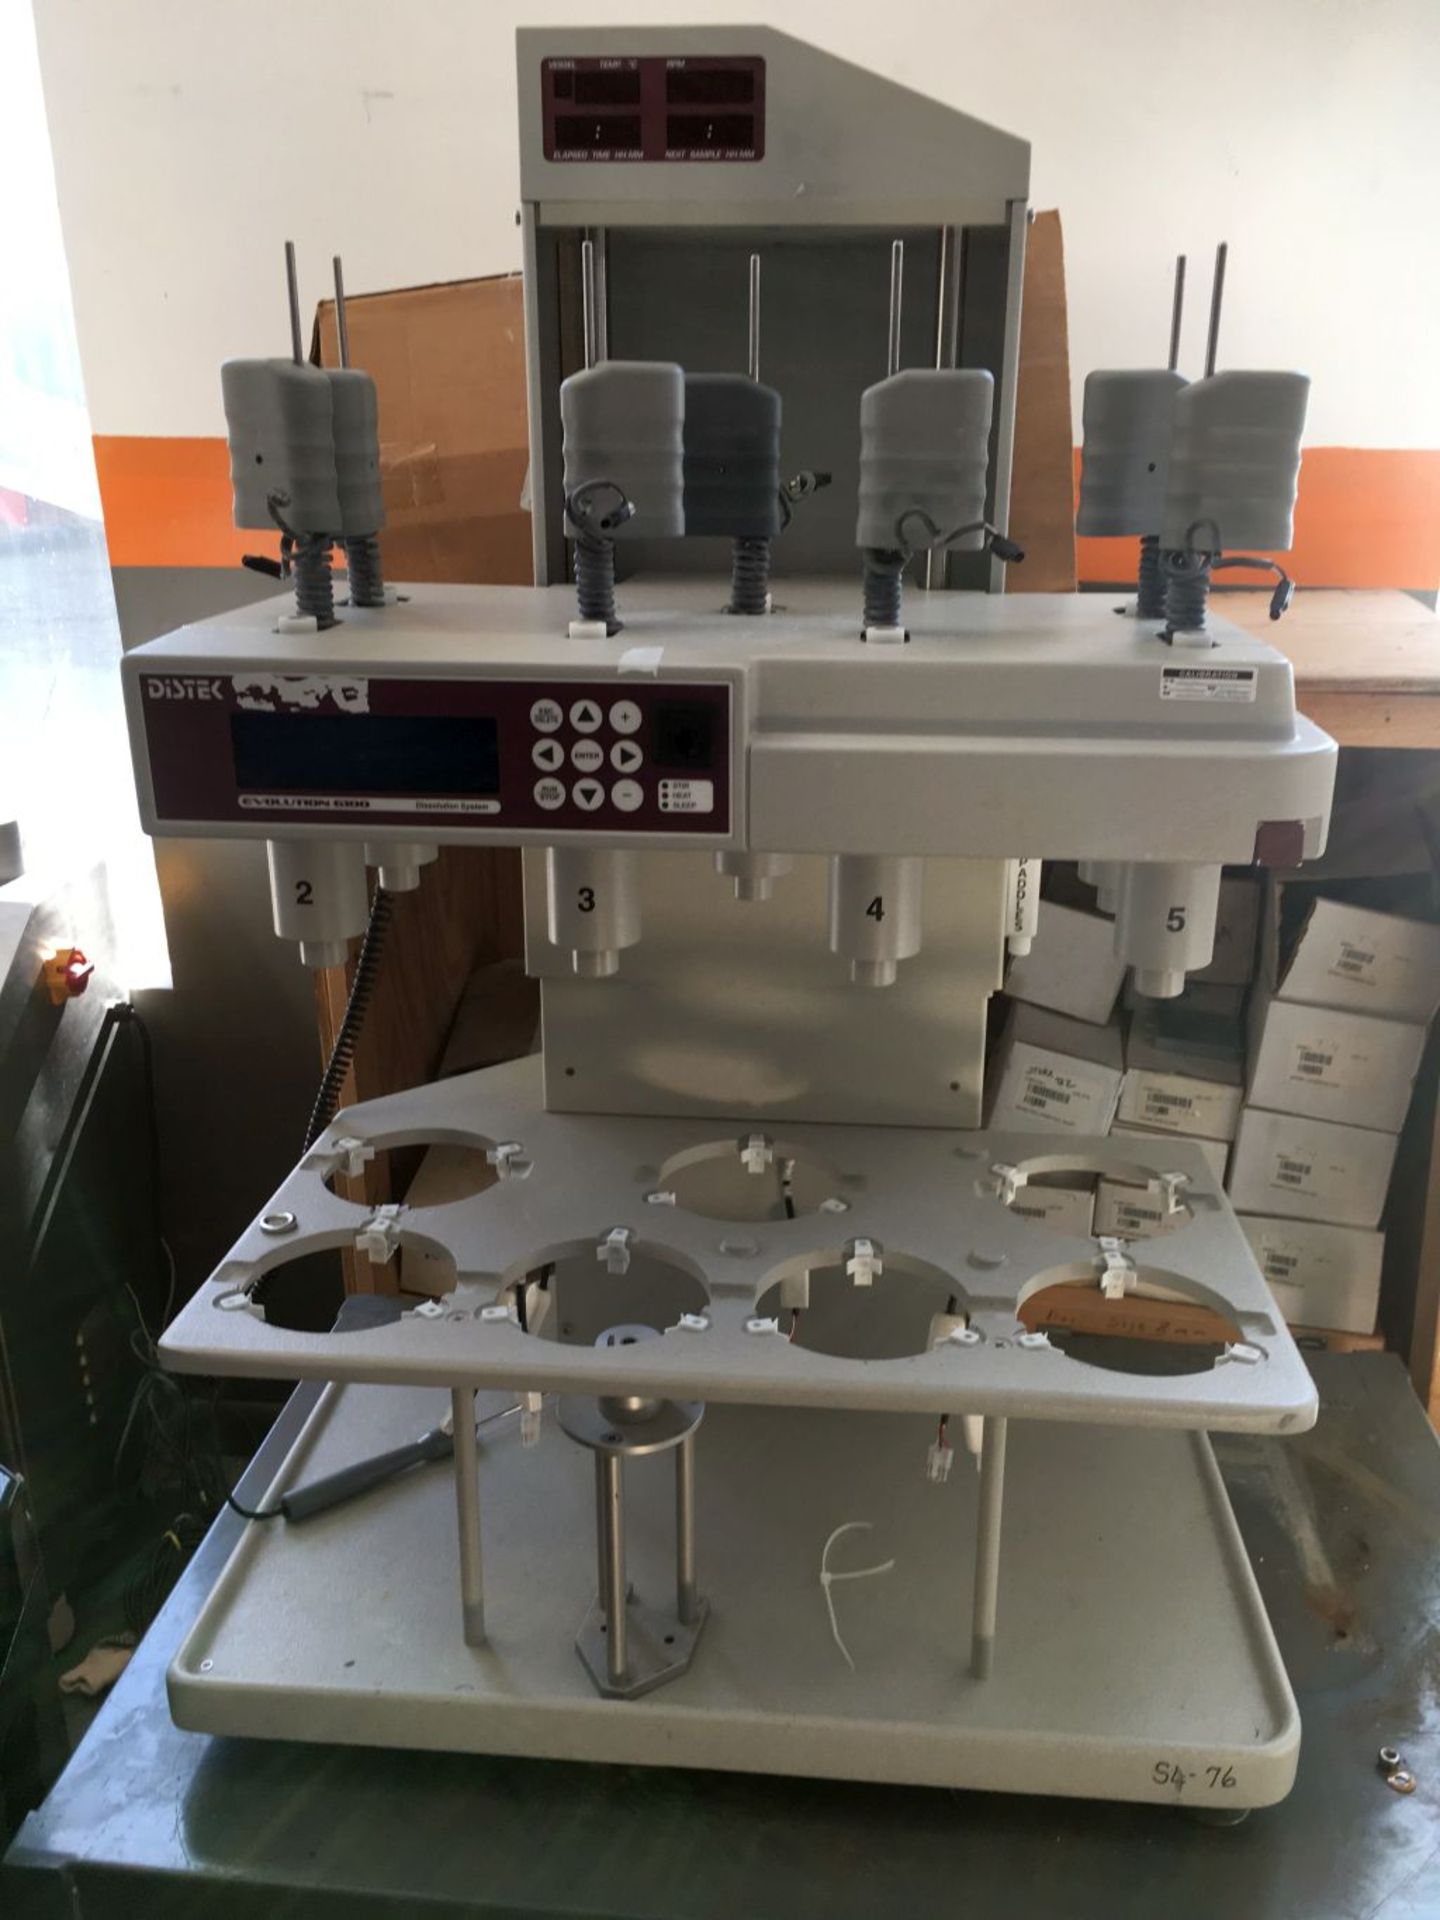 Distek Evolution 6100 Dissolution Tester. Model 6100. As shown in photos. (Located Central New